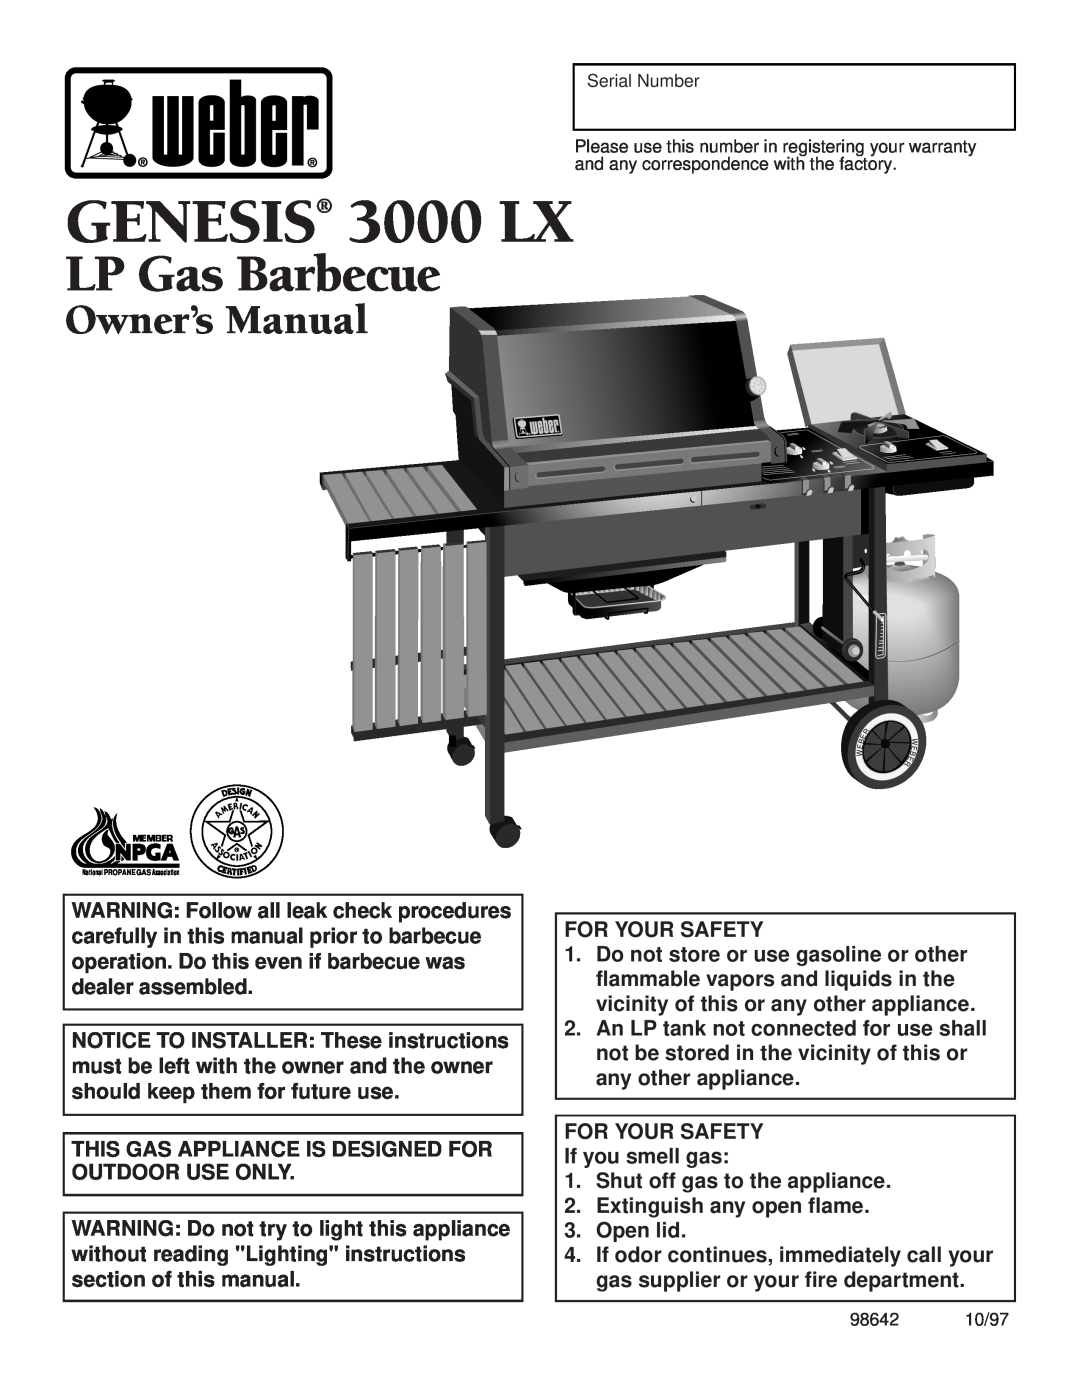 Weber 3000 LX owner manual Natural Gas Barbecue, Owner’s Manual, For Your Safety, Extinguish any open flame 3. Open lid 